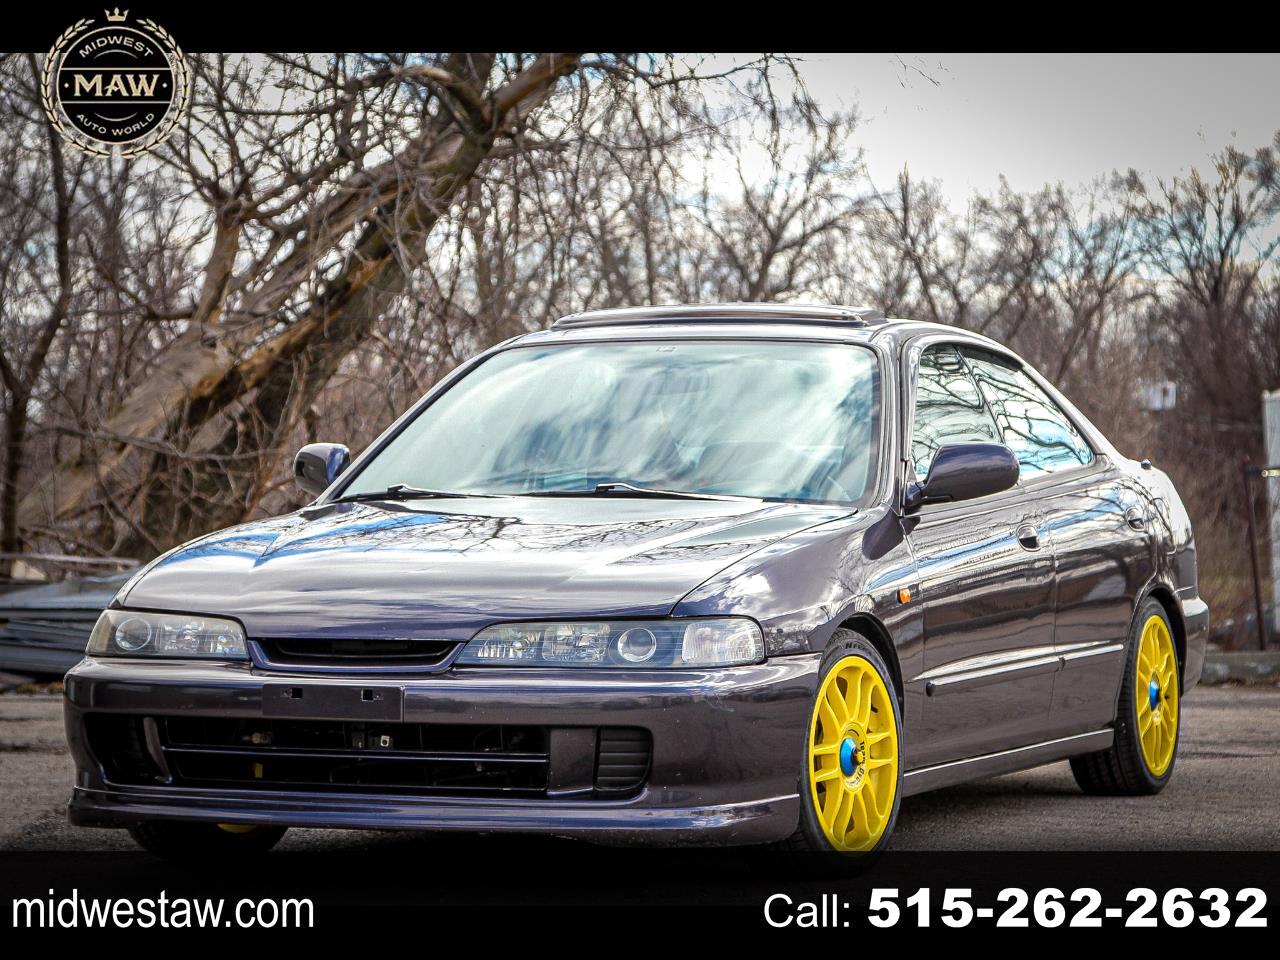 Used 1995 Acura Integra Sold In Des Moines Ia Midwest Auto World Llc